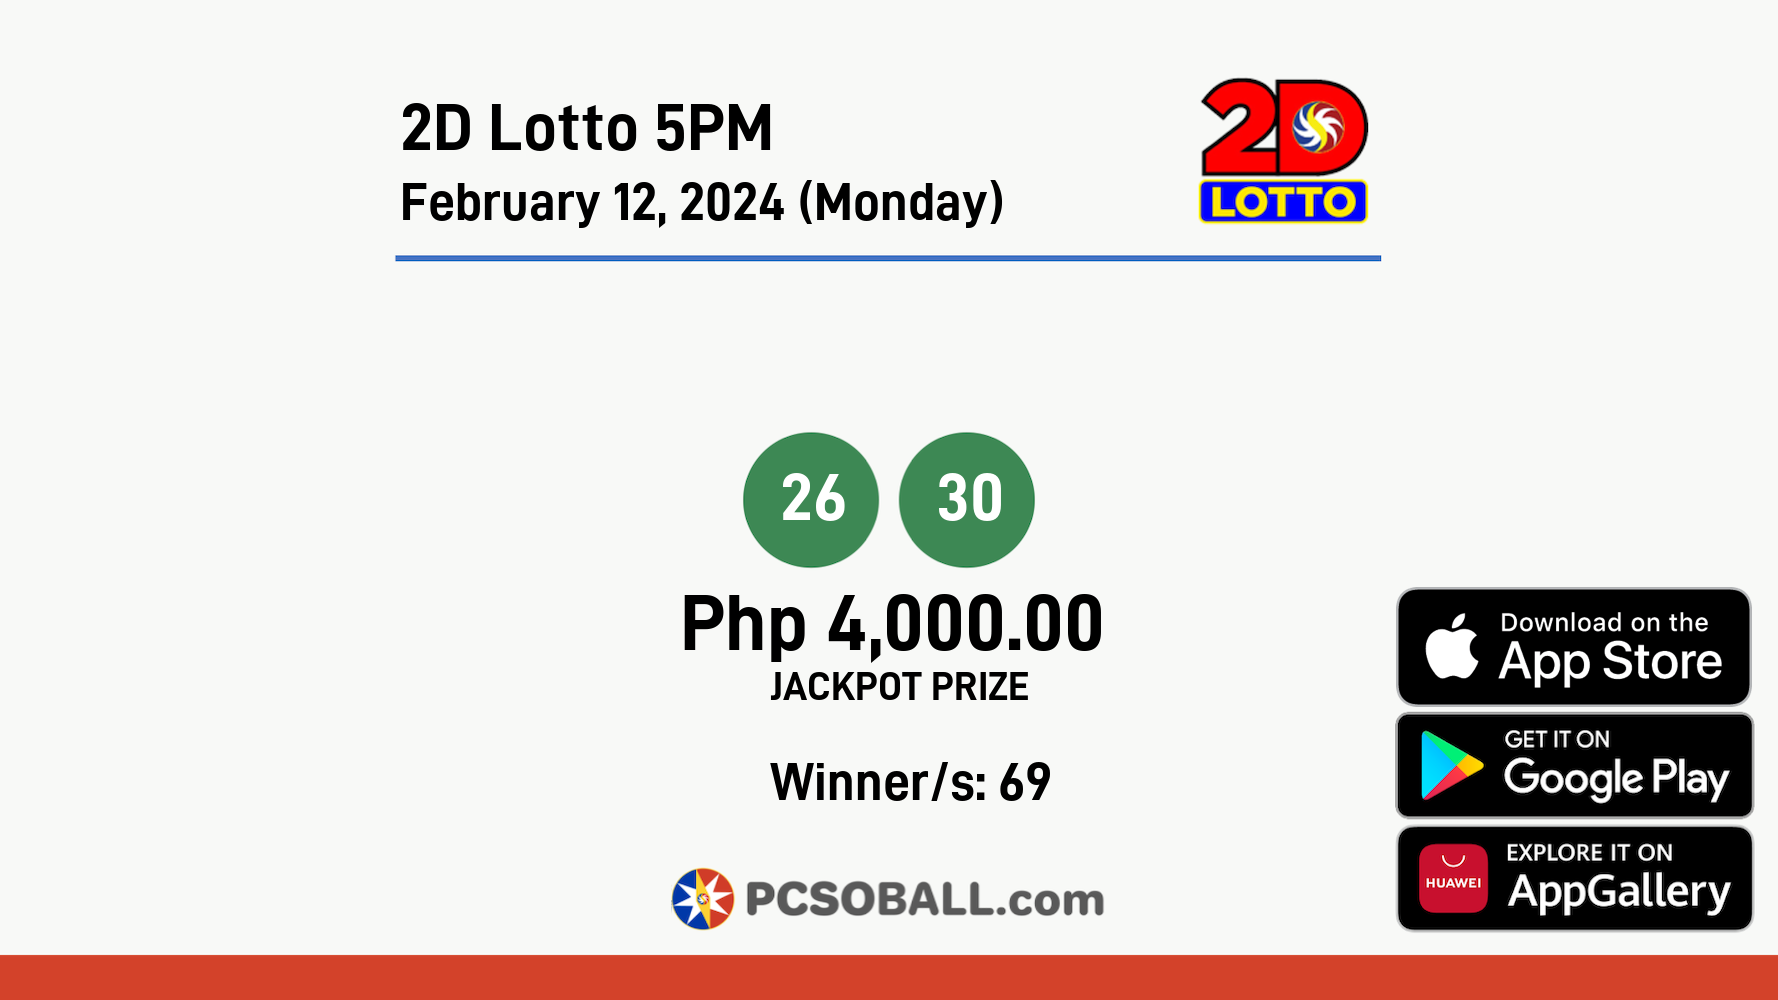 2D Lotto 5PM February 12, 2024 (Monday) Result